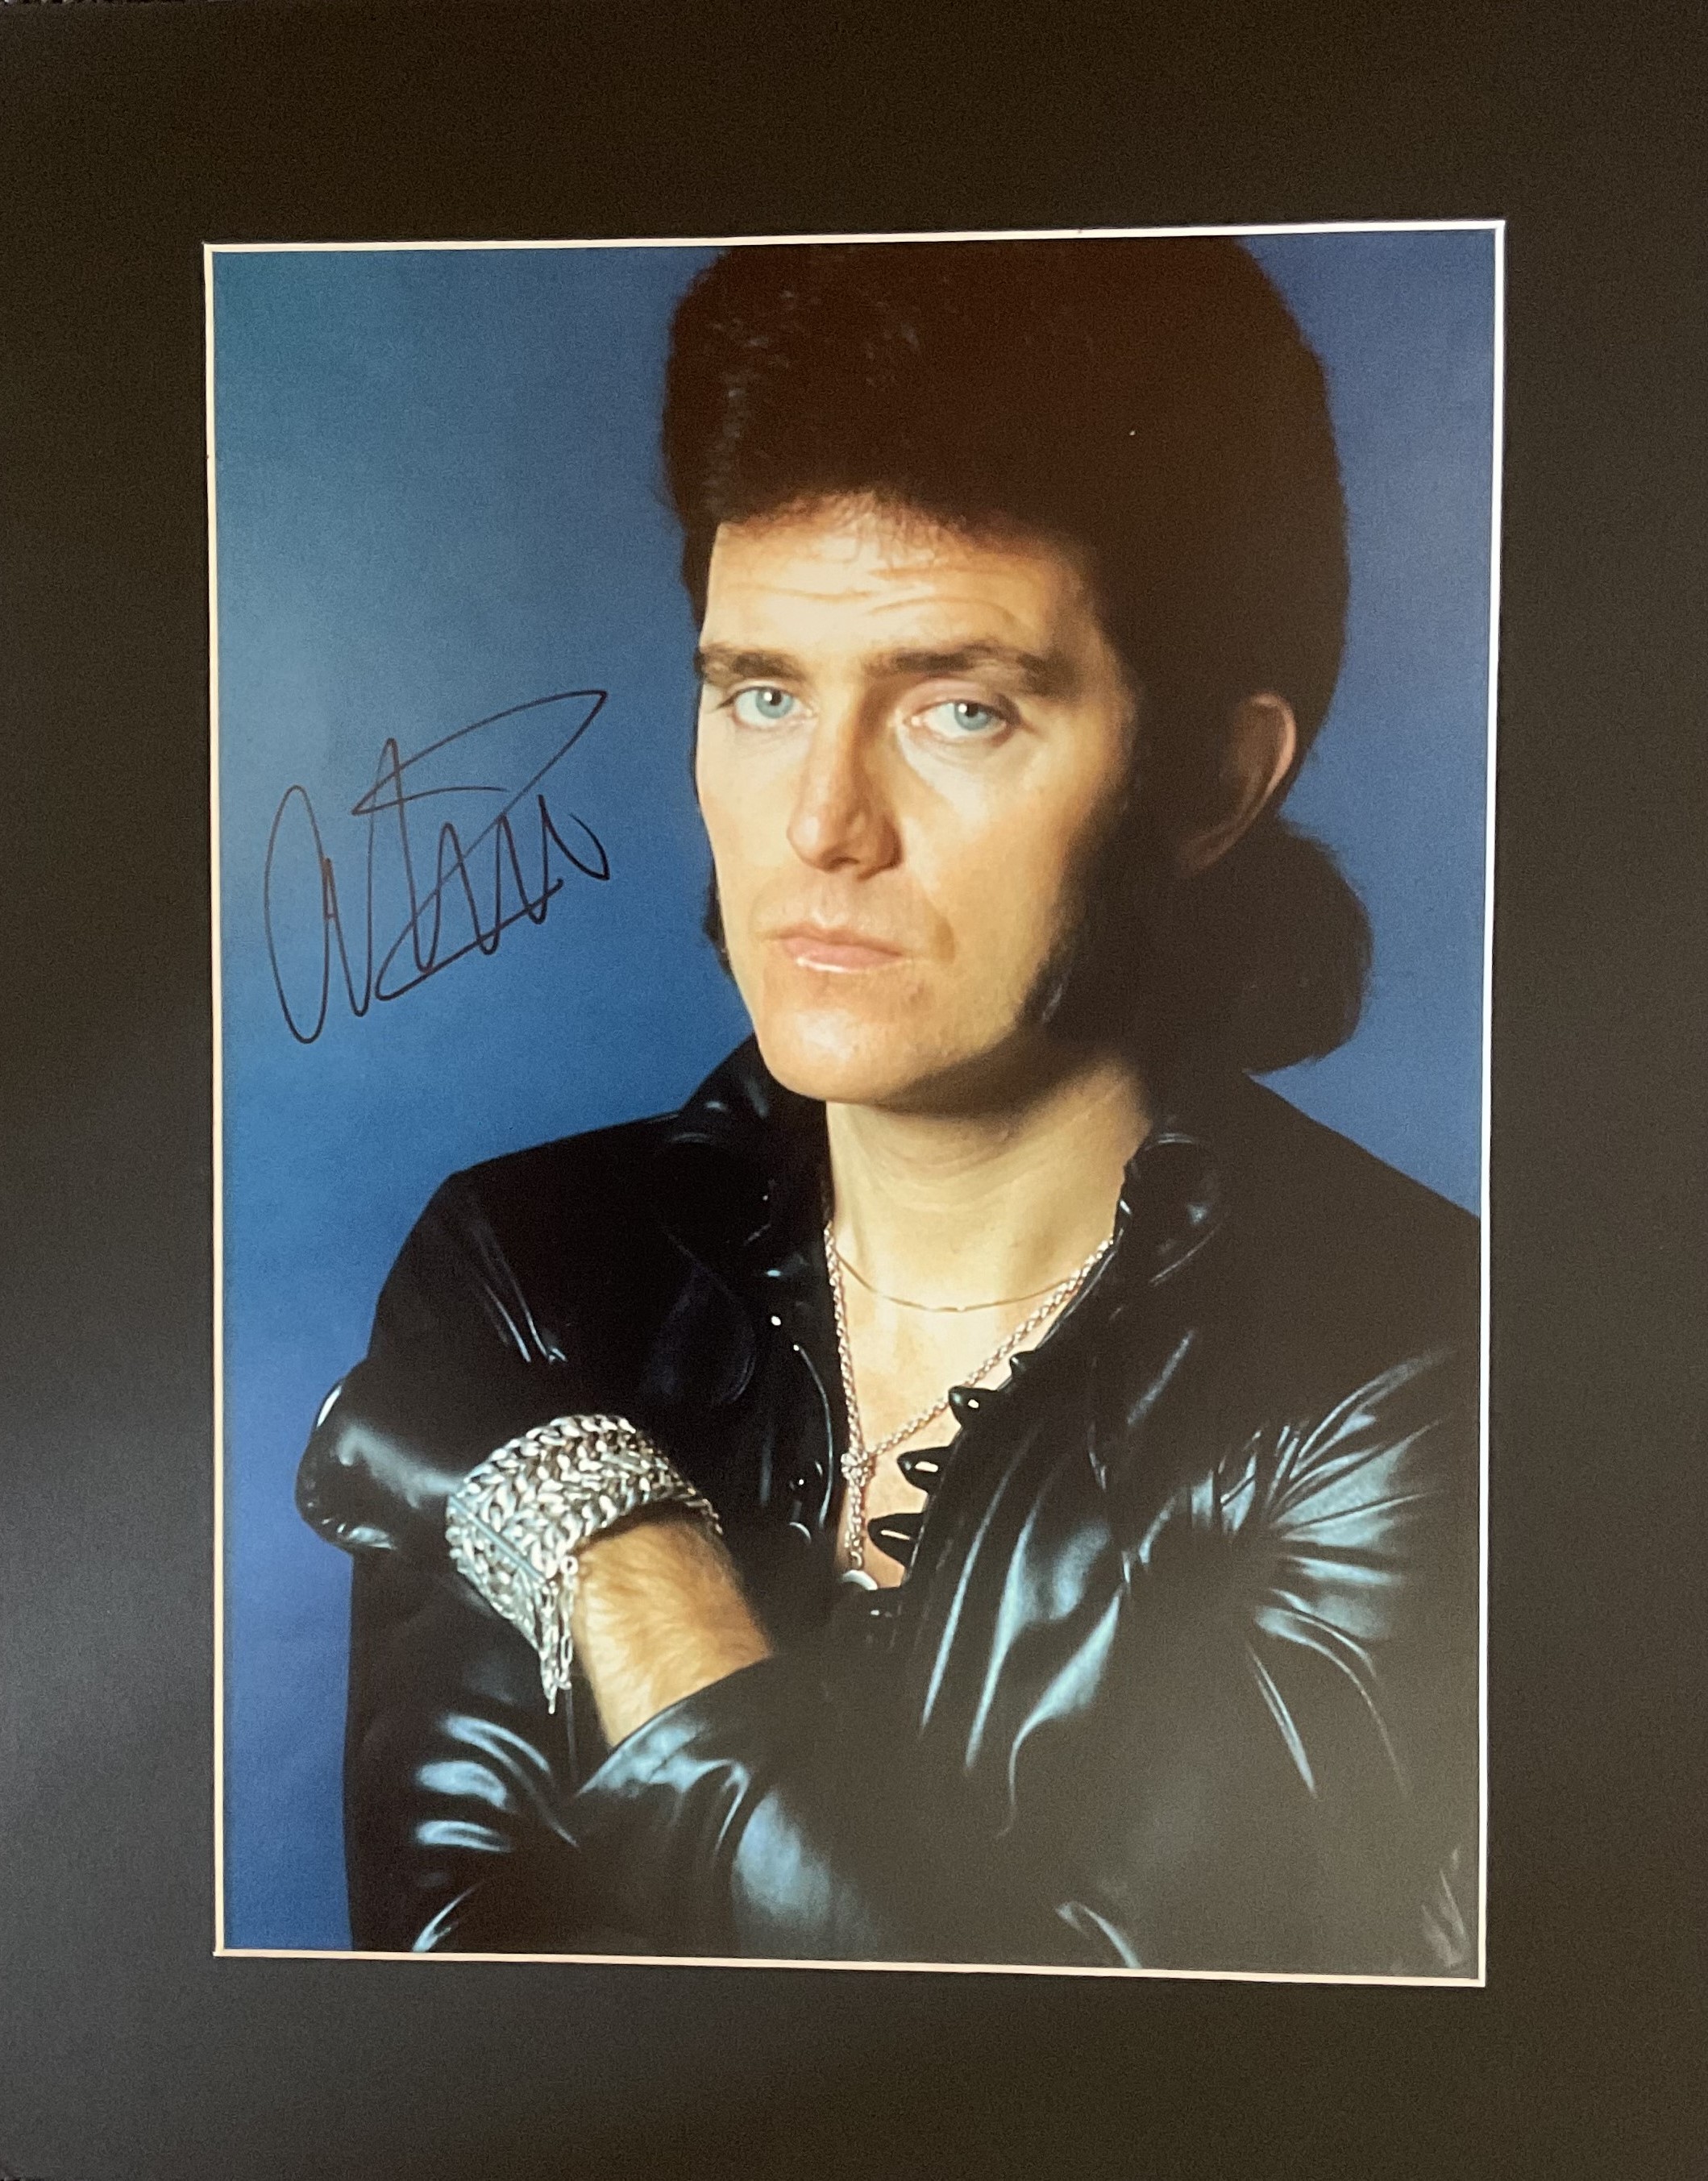 Alvin Stardust signed 20x16 inch mounted colour photo. Good Condition. All autographs come with a